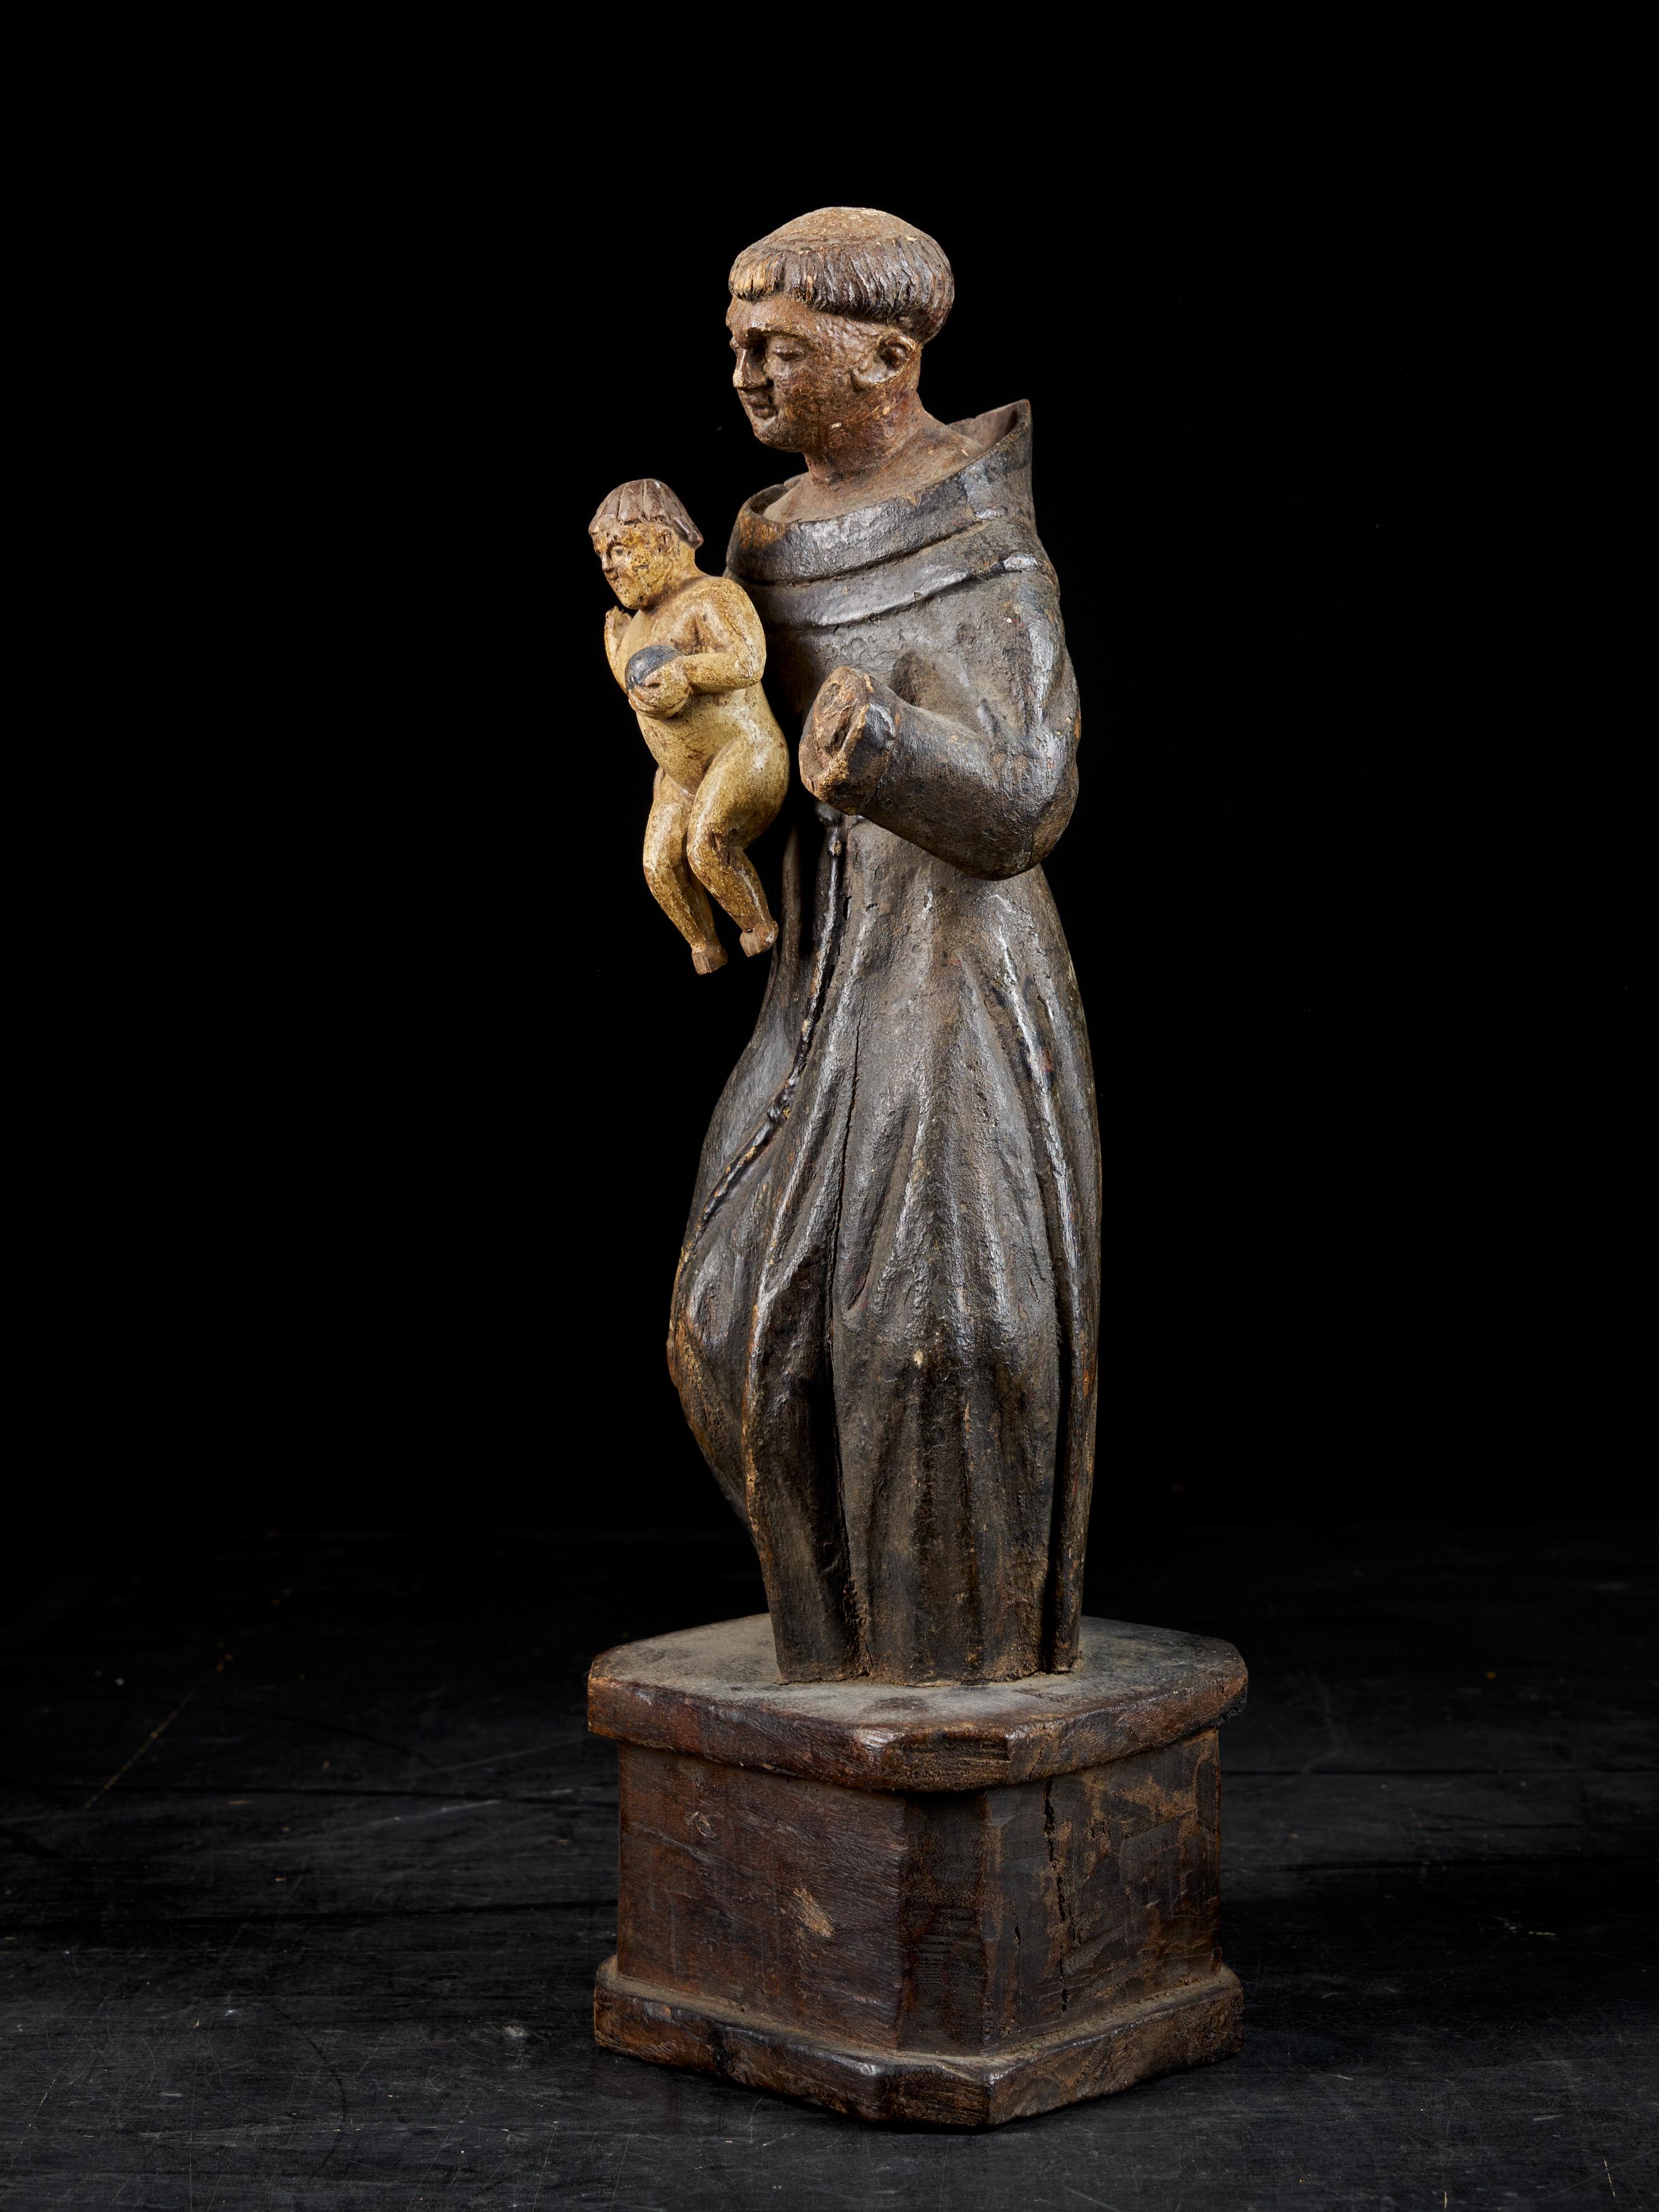 According to the legends, there are two types of Saint Anthony’s, they can easily be distinguished by their hair. This one is known as Saint Anthony of Padua, he is recognizable by his clerical tonsure. It is practice of cutting or shaving some of